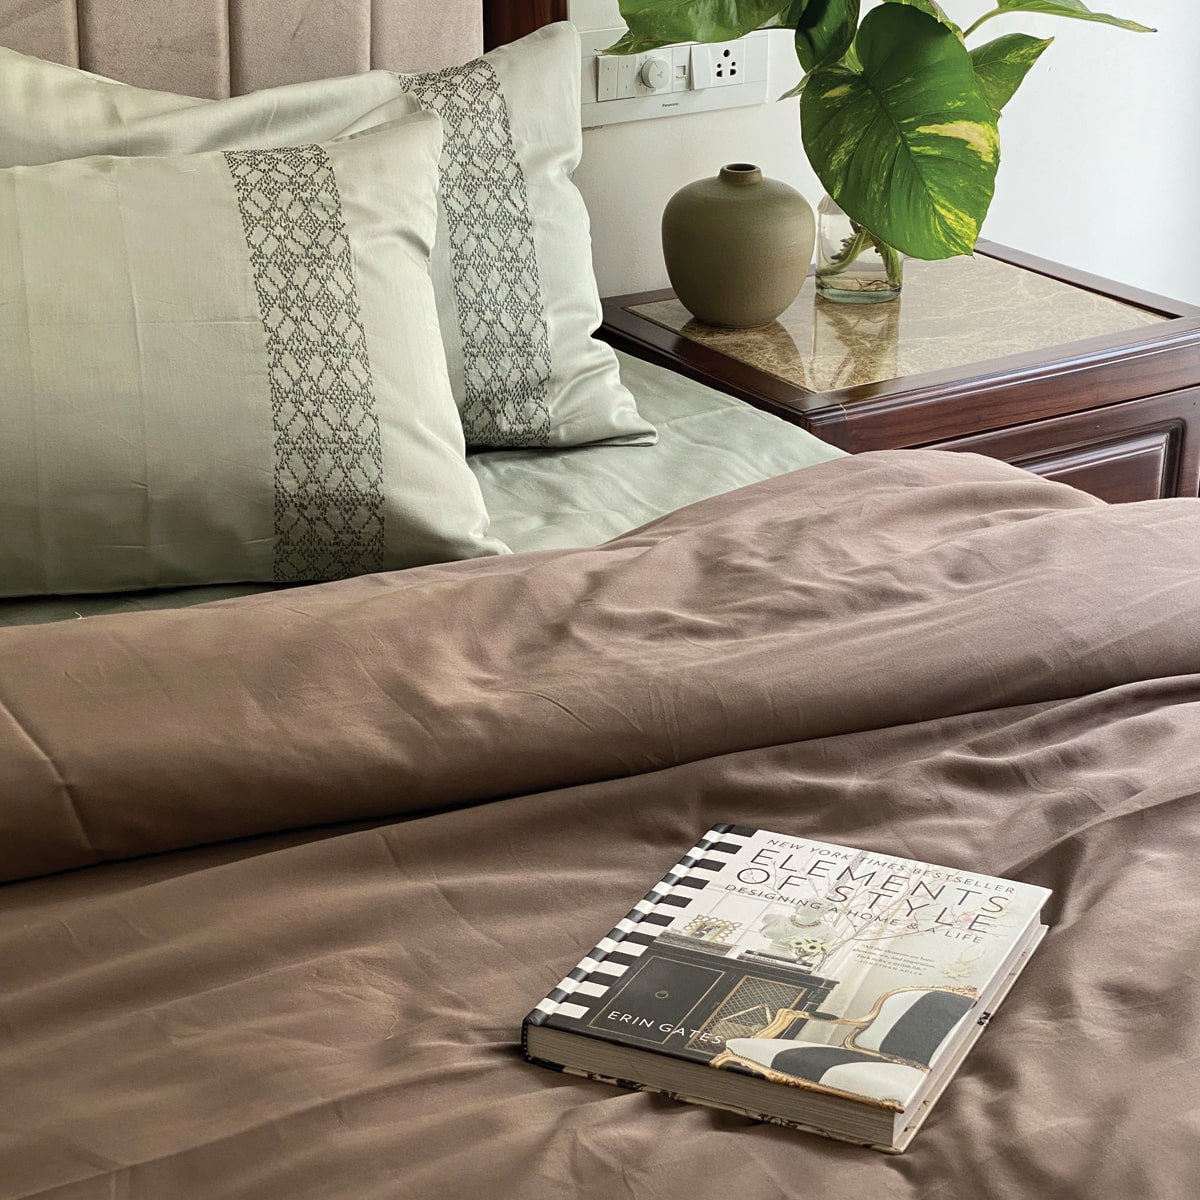 Gemstone Sage Green and Taupe Dreams Duvet Cover Set